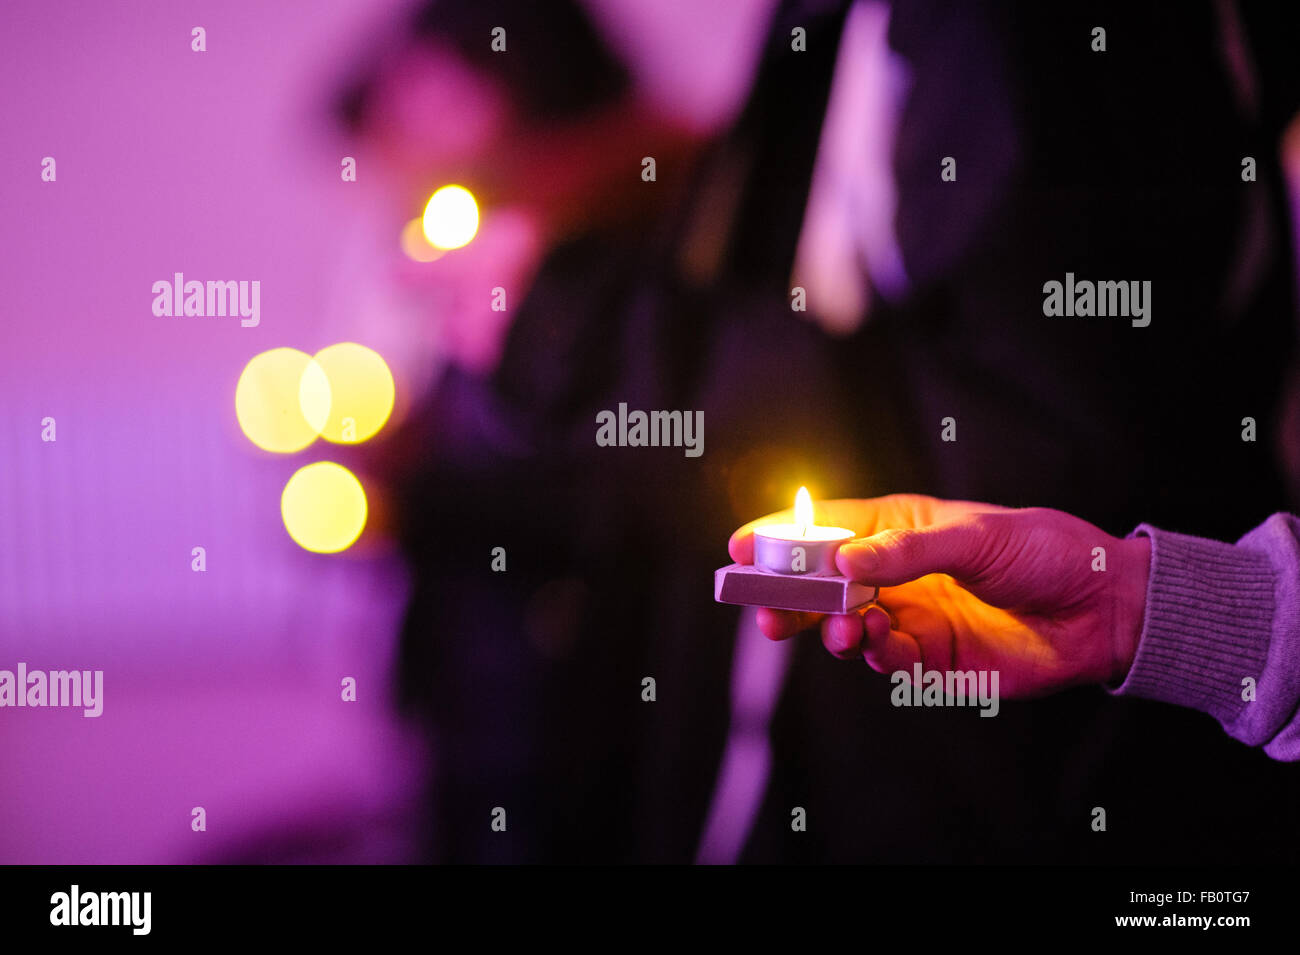 Hand holding candle light. Symbol of hope, peace and love Stock Photo